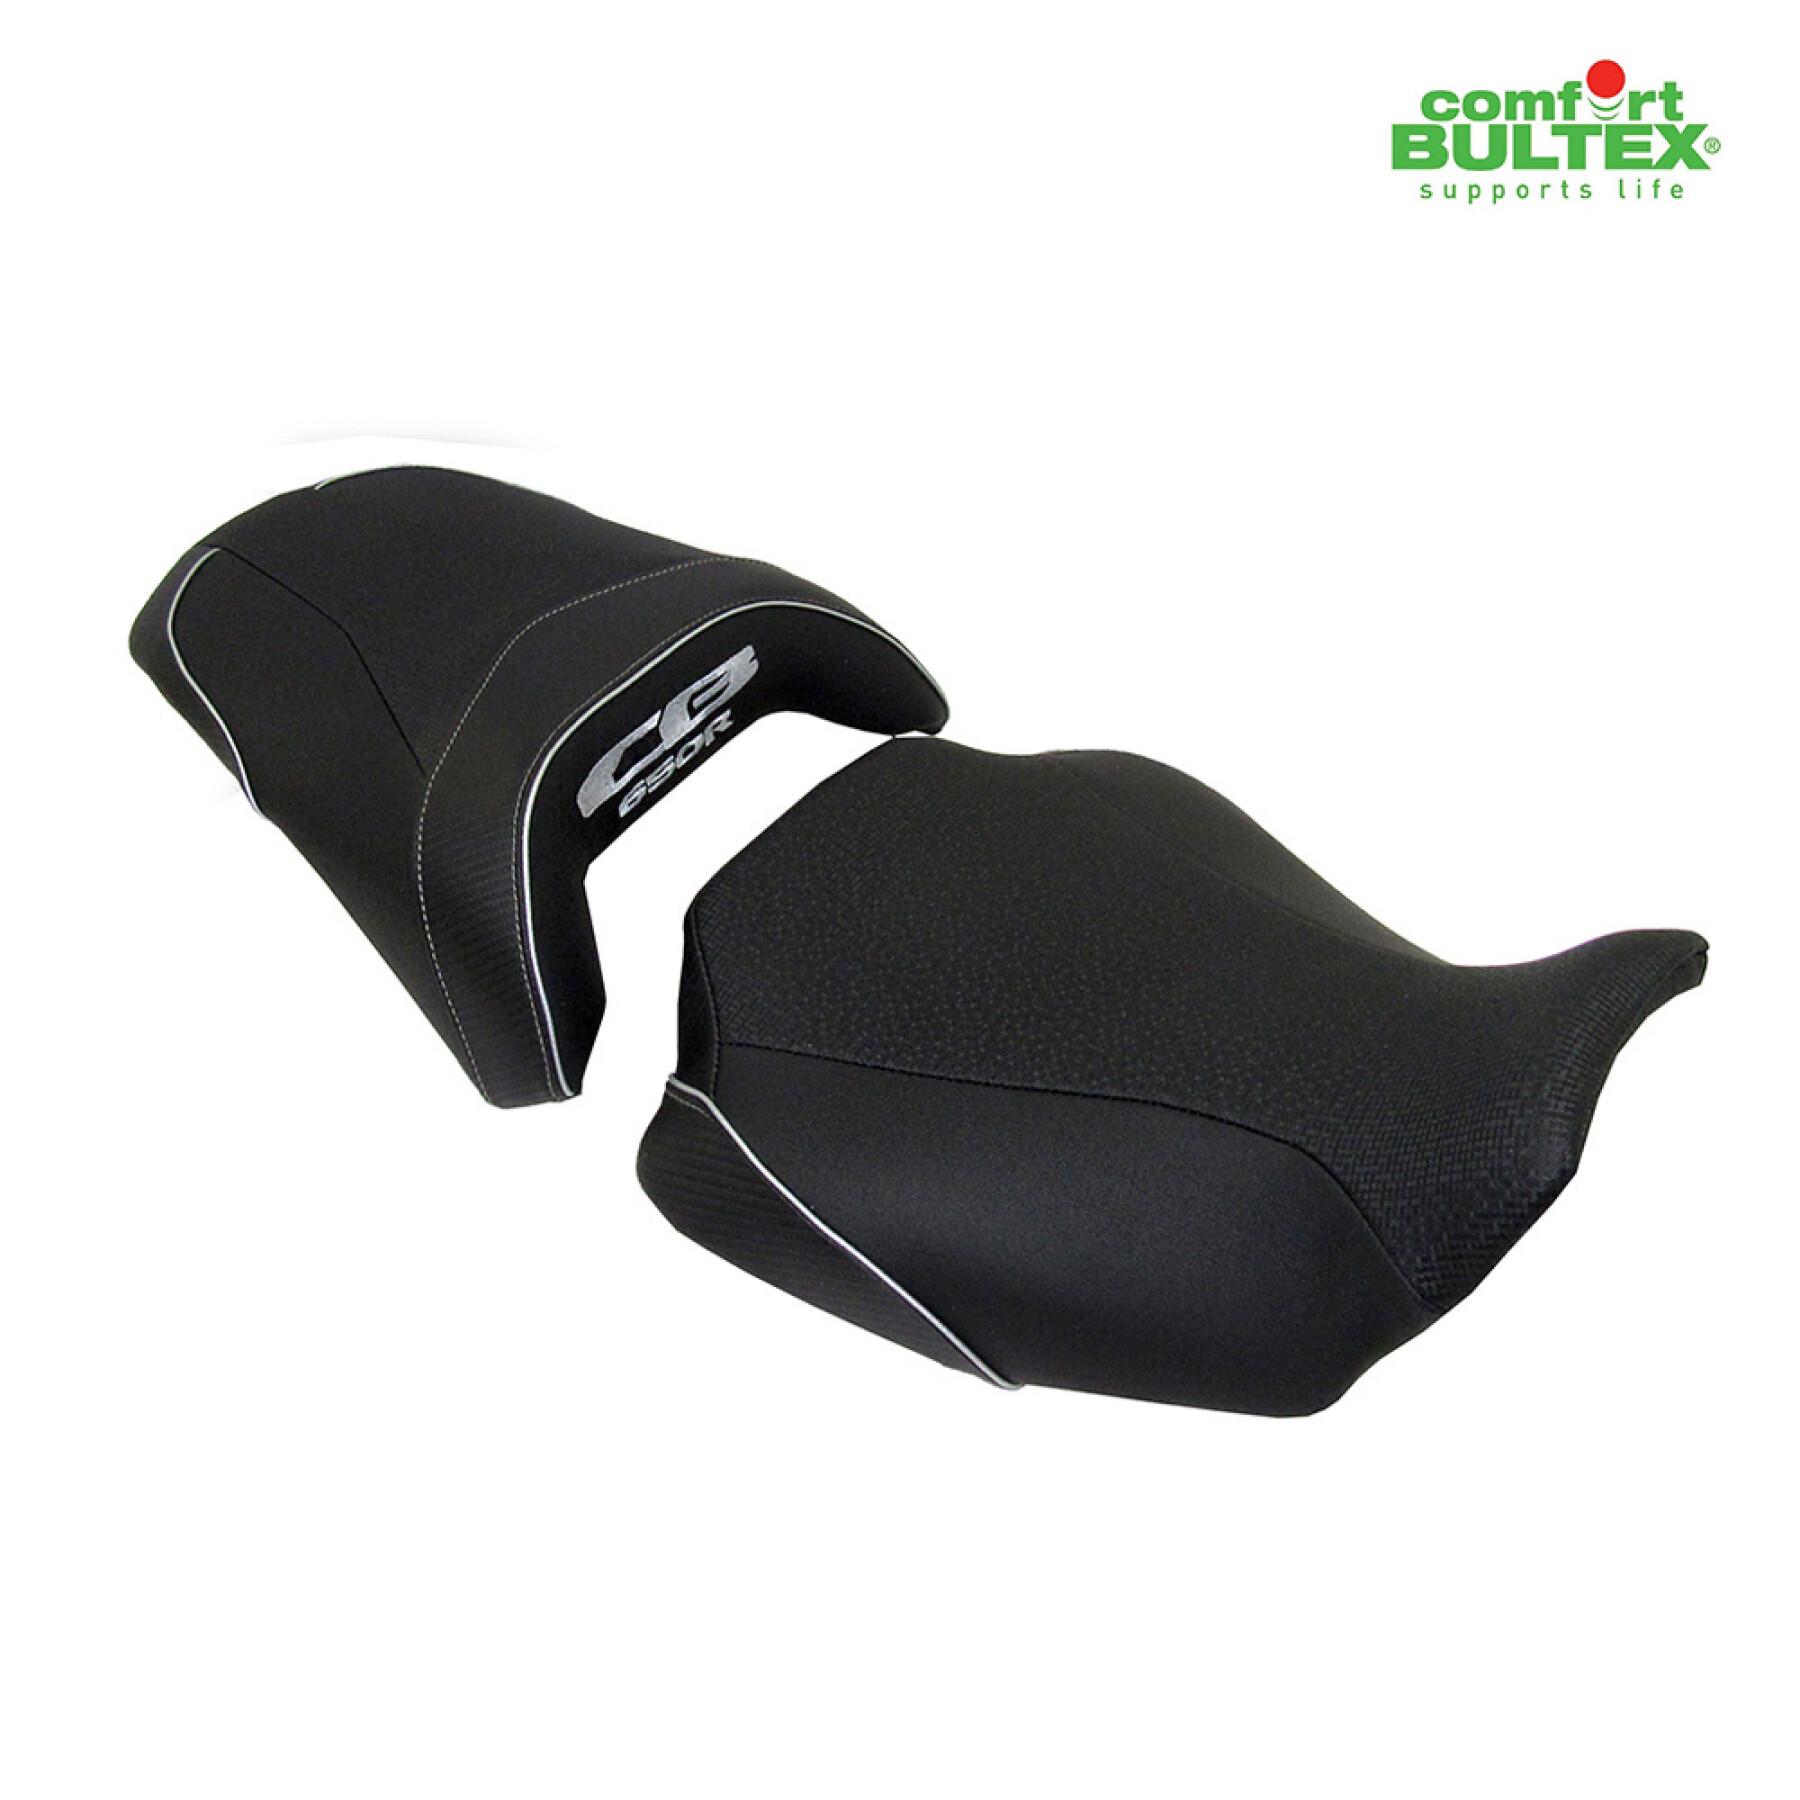 Motorcycle saddle with bultex foam option for the 2 Bagster Ready Luxe HONDA CB 650 R/CBR 650 R - 2019/2020